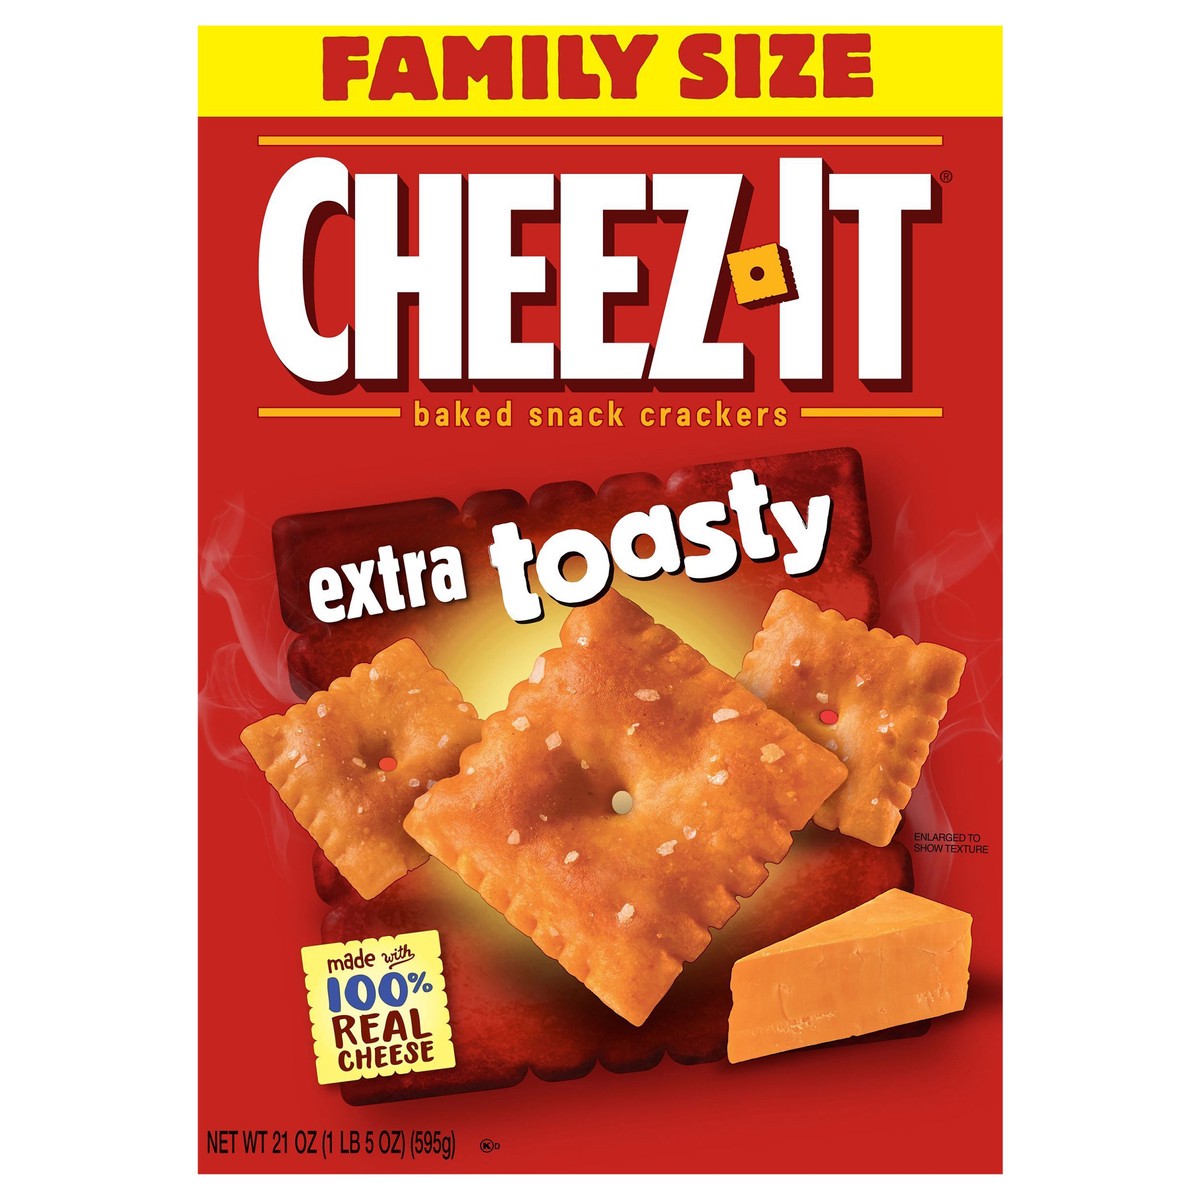 slide 1 of 5, Cheez-It Extra Toasty Family Size Baked Snack Crackers, 21 oz